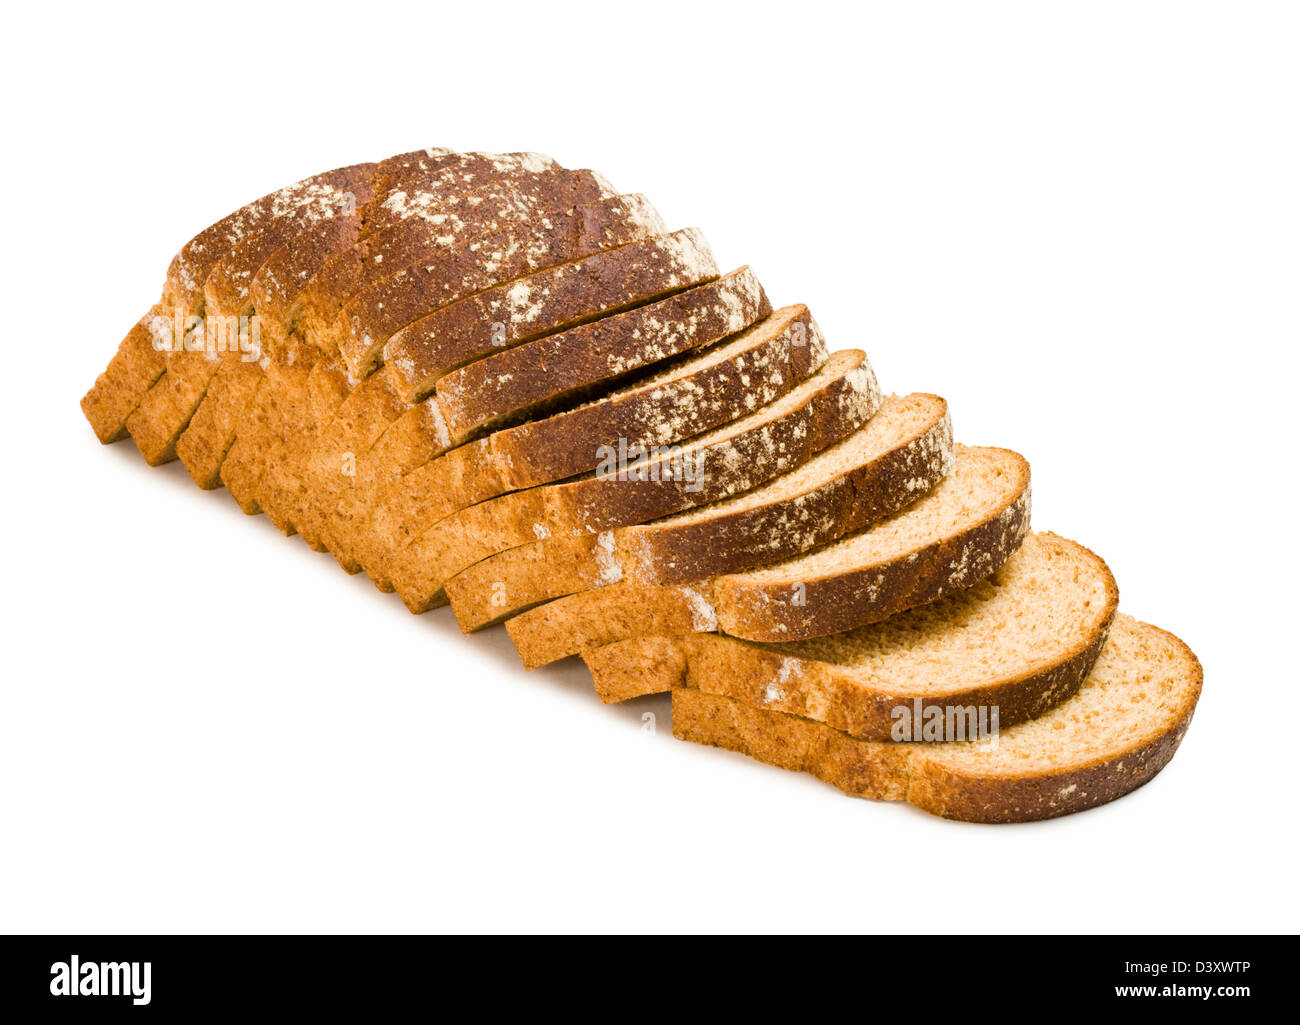 Loaf of sliced brown (wholemeal) bread. Stock Photo